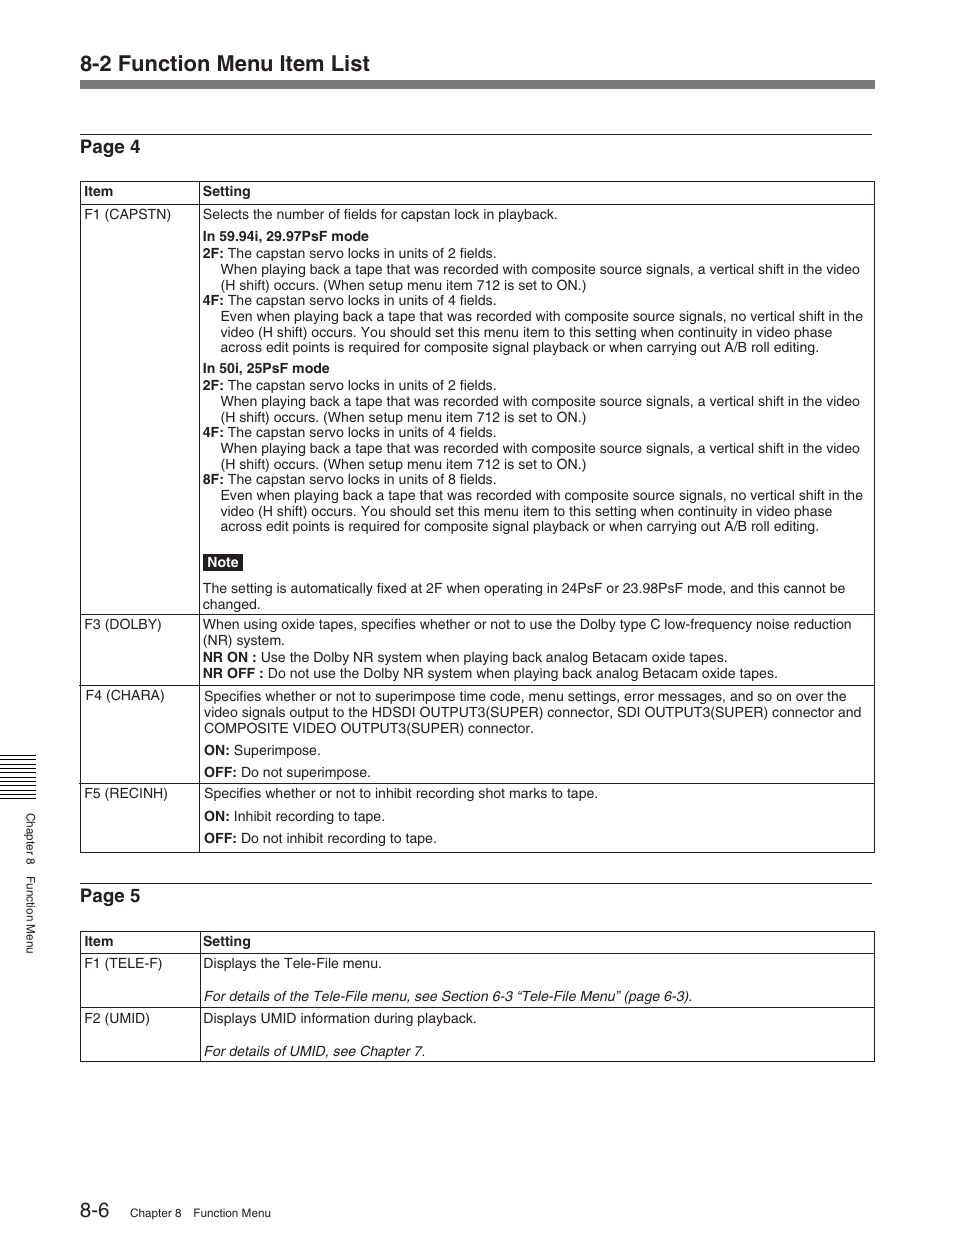 2 function menu item list, Page 4 page 5 | Sony HDW-M2100 User Manual | Page 70 / 115